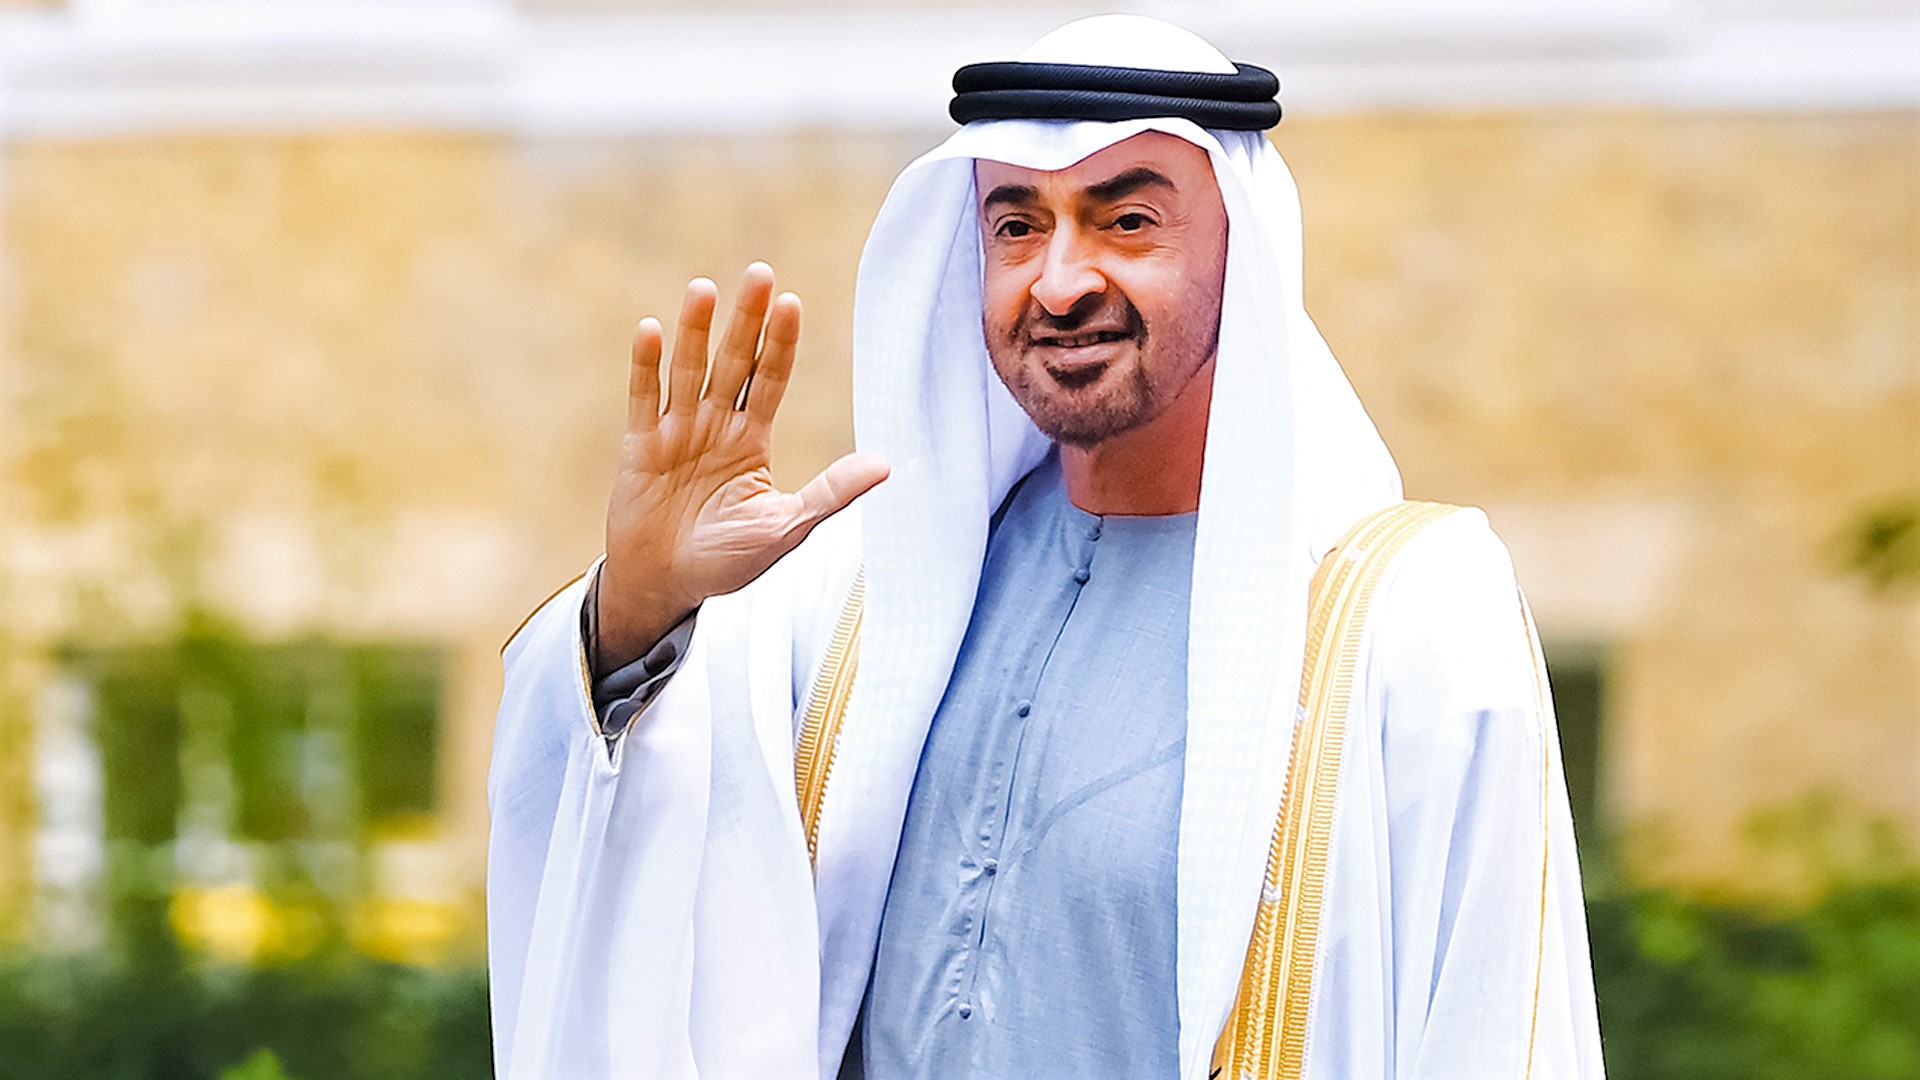 Sheikh Mohamed stresses collaboration, peace, and social development